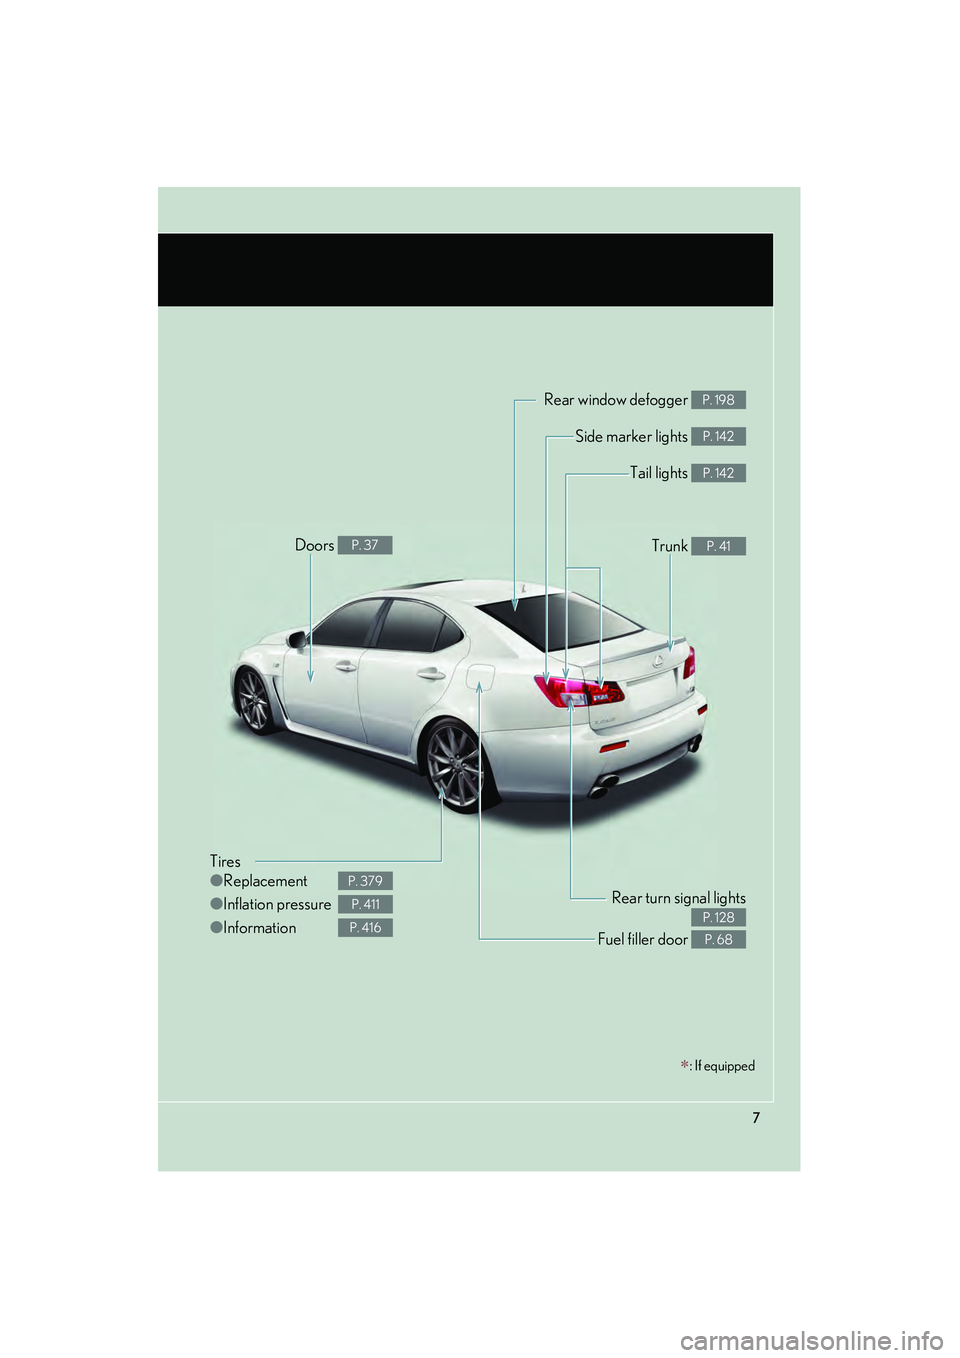 Lexus IS F 2009  Owners Manual 08_IS F_U_(L/O_0808)
7
∗: If equipped
Tires
●Replacement
● Inflation pressure
● Information
P. 379
P. 411
P. 416
Tail lights P. 142
Side marker lights P. 142
Trunk P. 41
Rear window defogger P